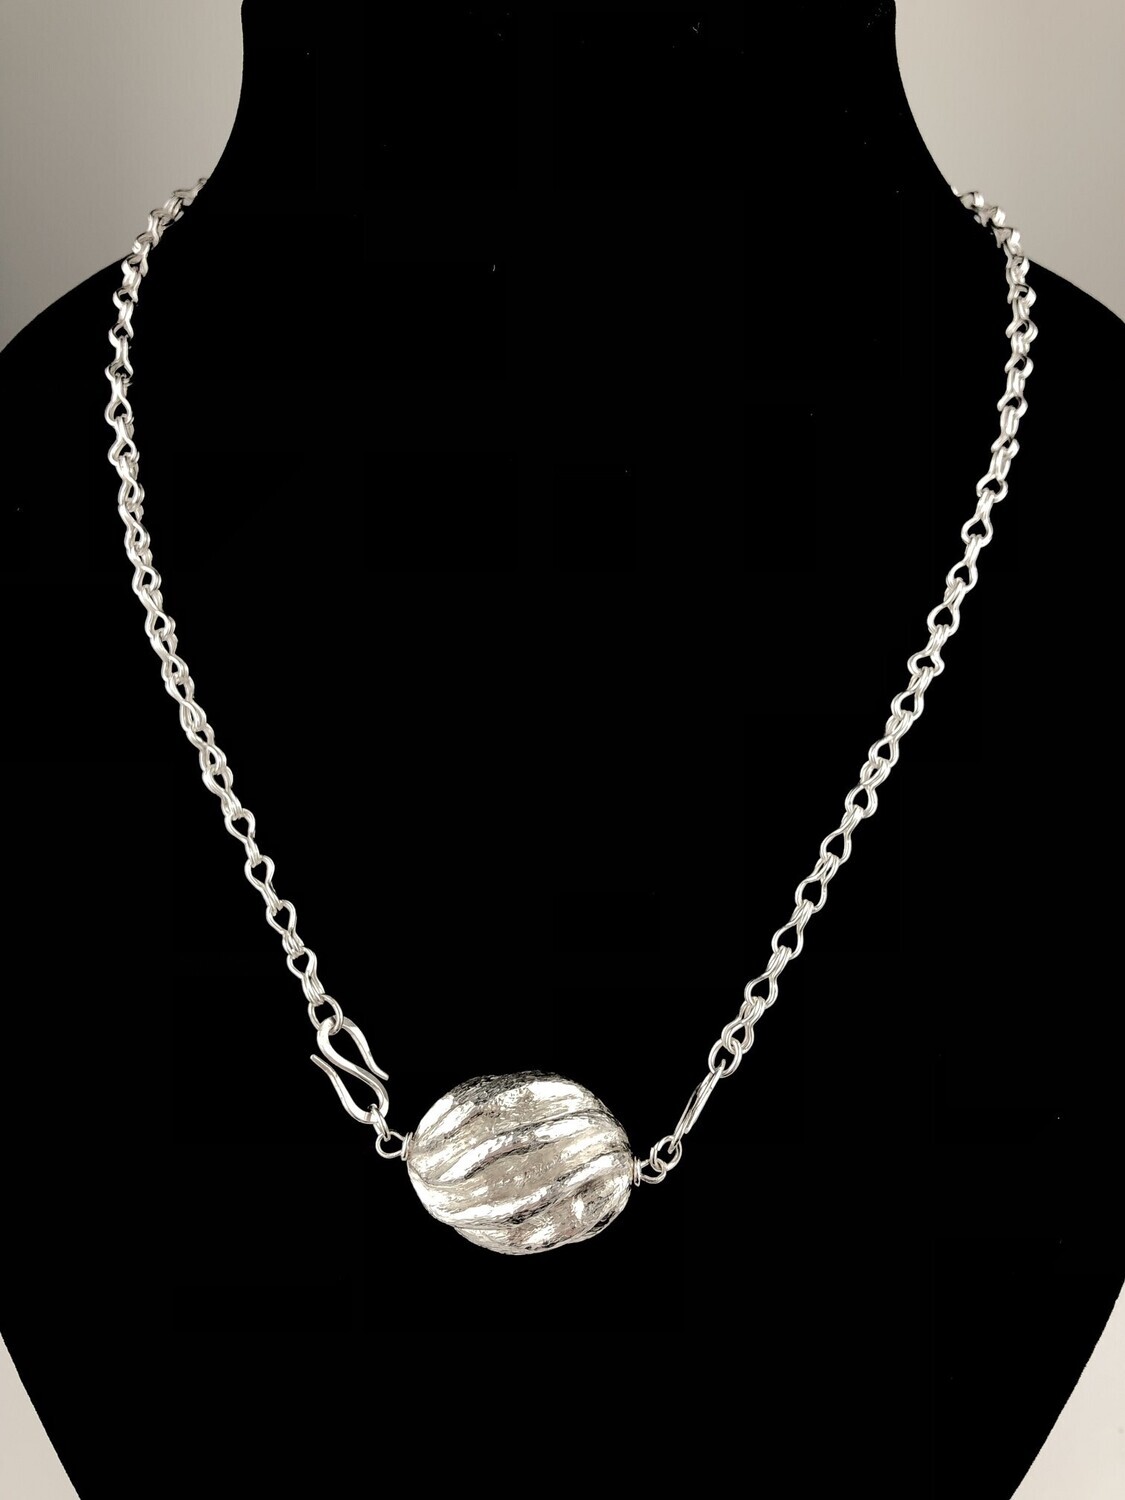 Spiral Ball Pendant with Pinched Loop in Loop Chain 18